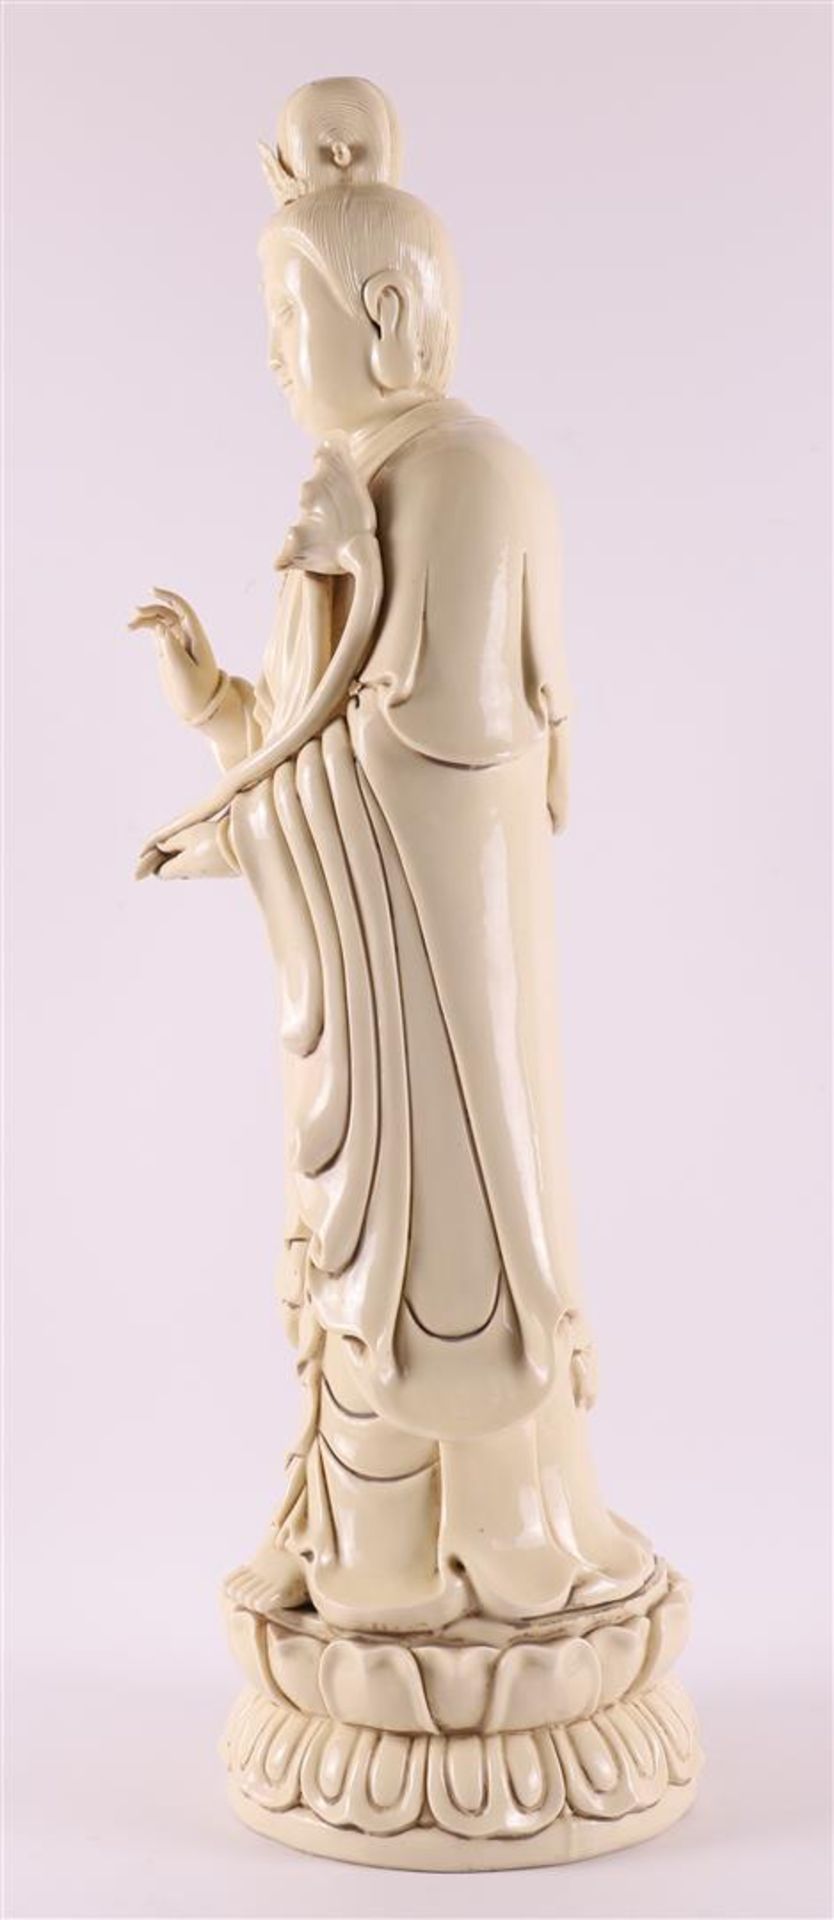 A white Chinese Kwan Yin standing on a lotus crown, China, 20th century. - Image 7 of 15